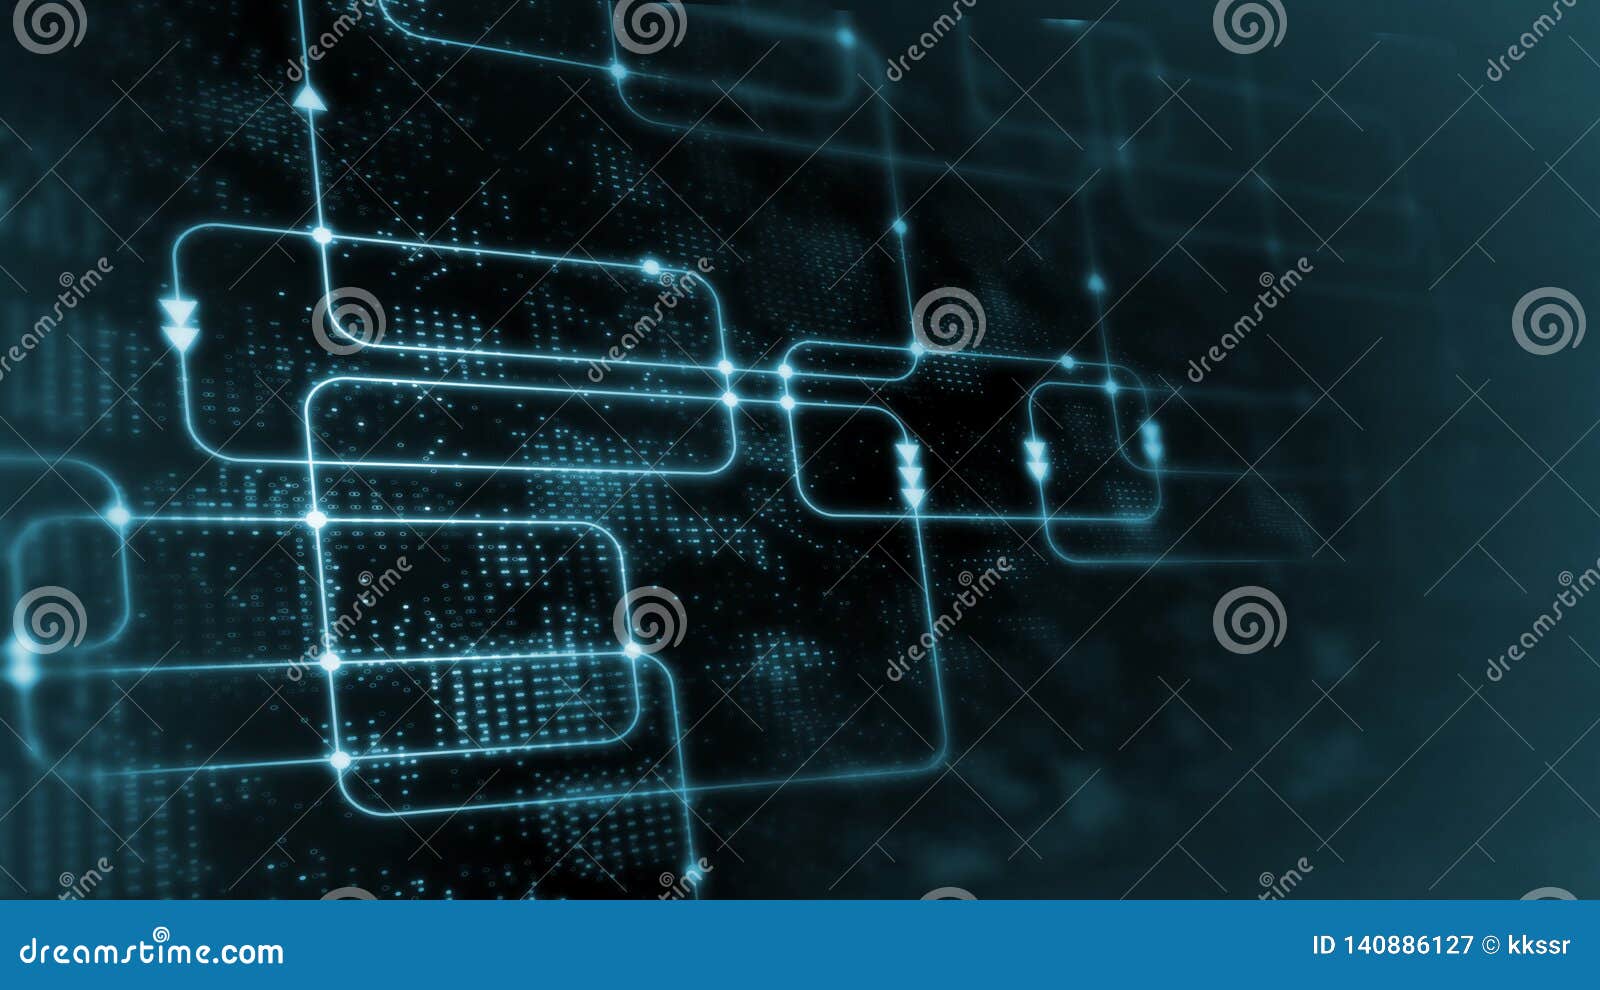 3d rendering of digital abstract technology. blue color computer software flow chart on data science system diagram background.